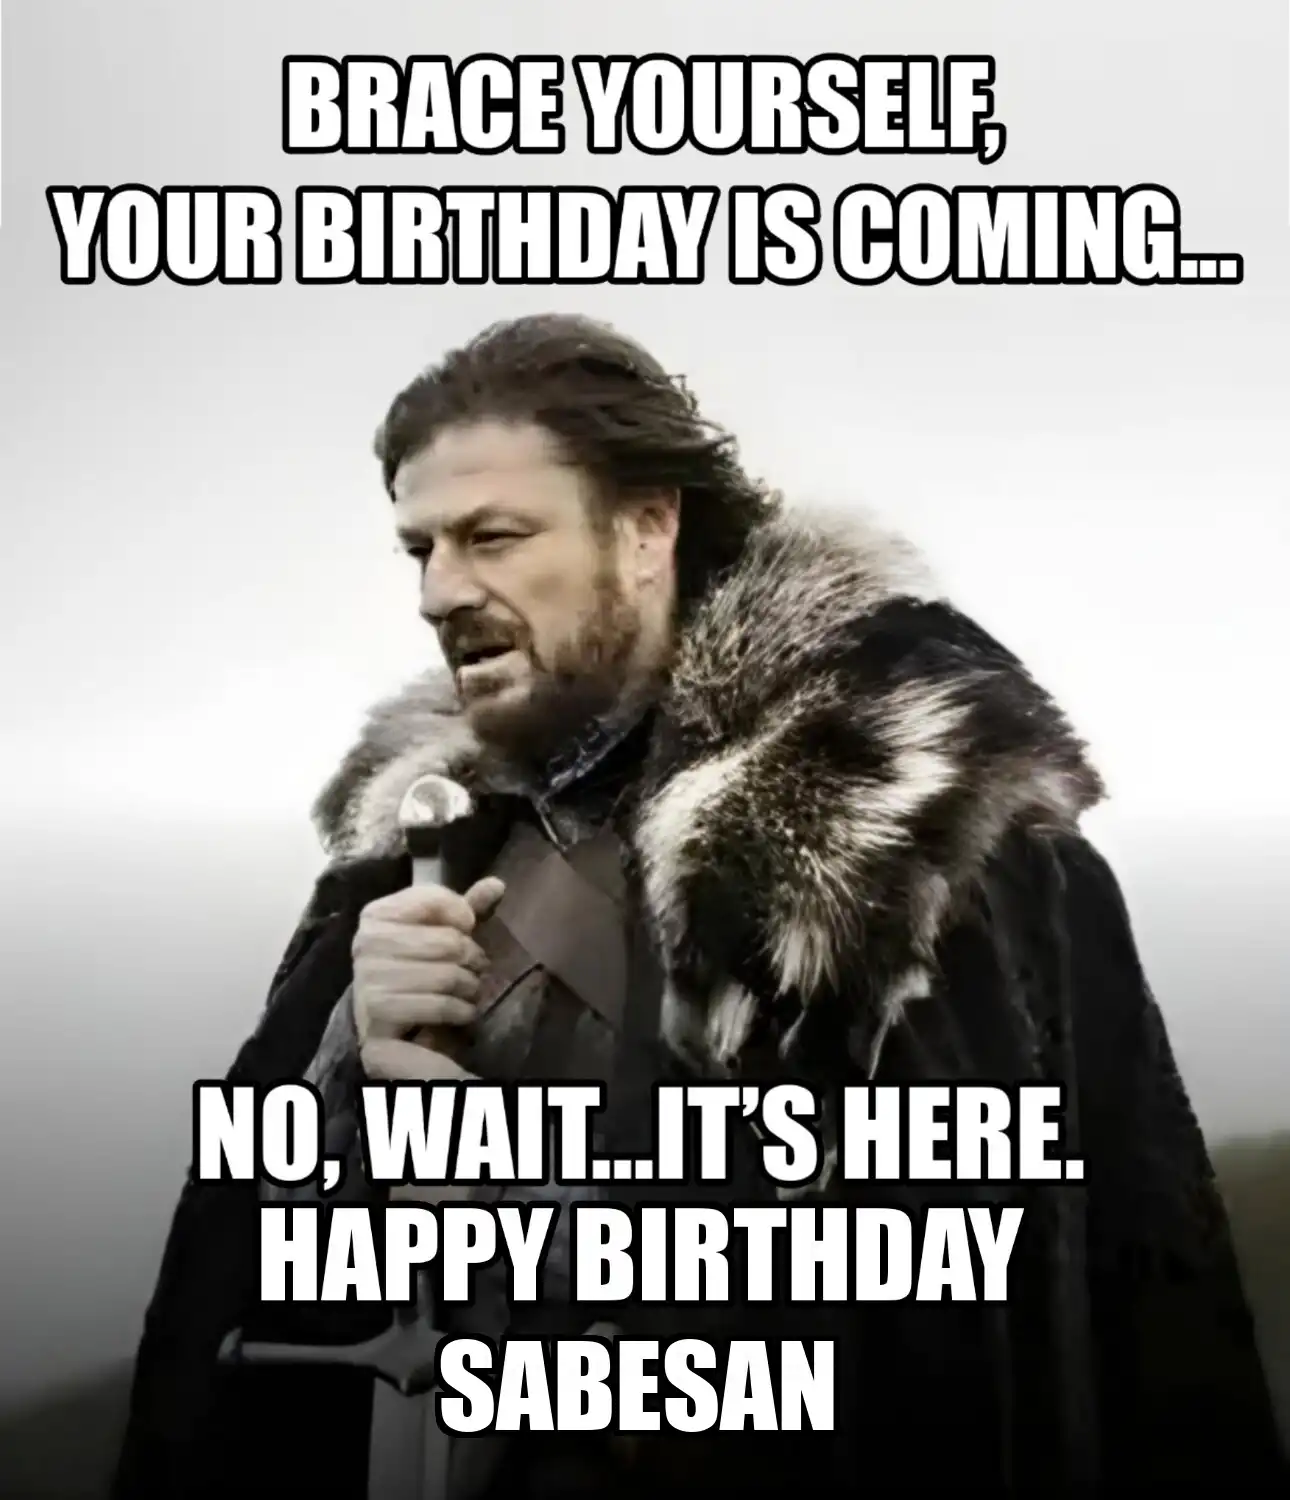 Happy Birthday Sabesan Brace Yourself Your Birthday Is Coming Meme